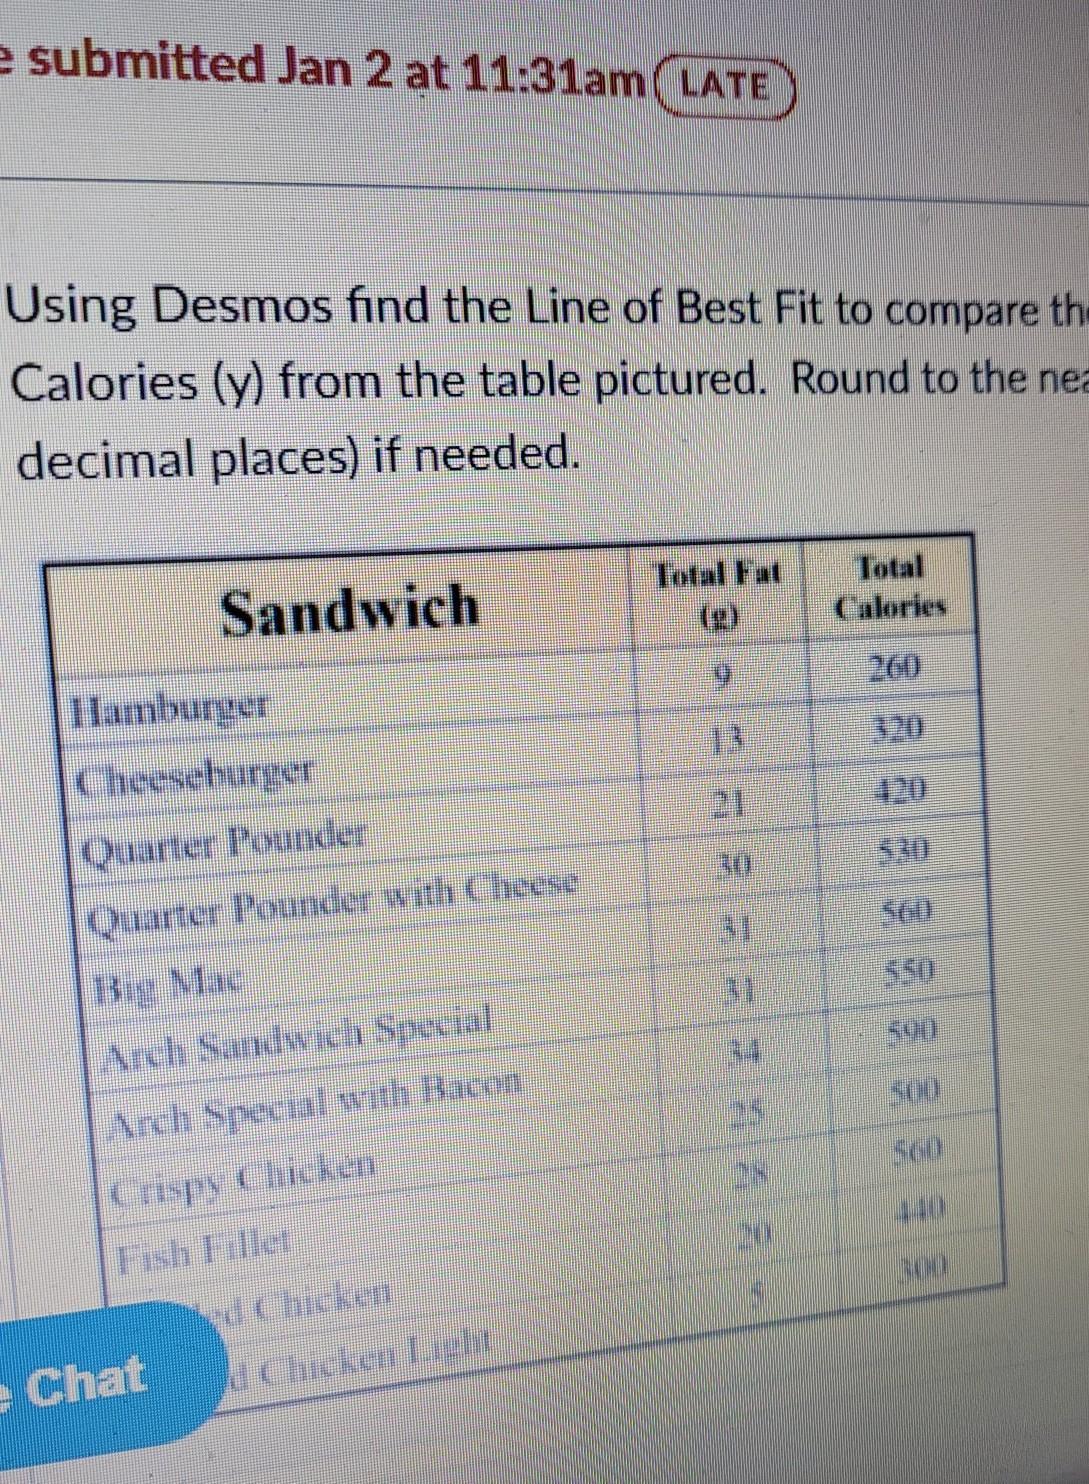 Using Demos Find The Line Of Best Fit To Compare Fat (x) And The Calories(y) From The Table Pictured.